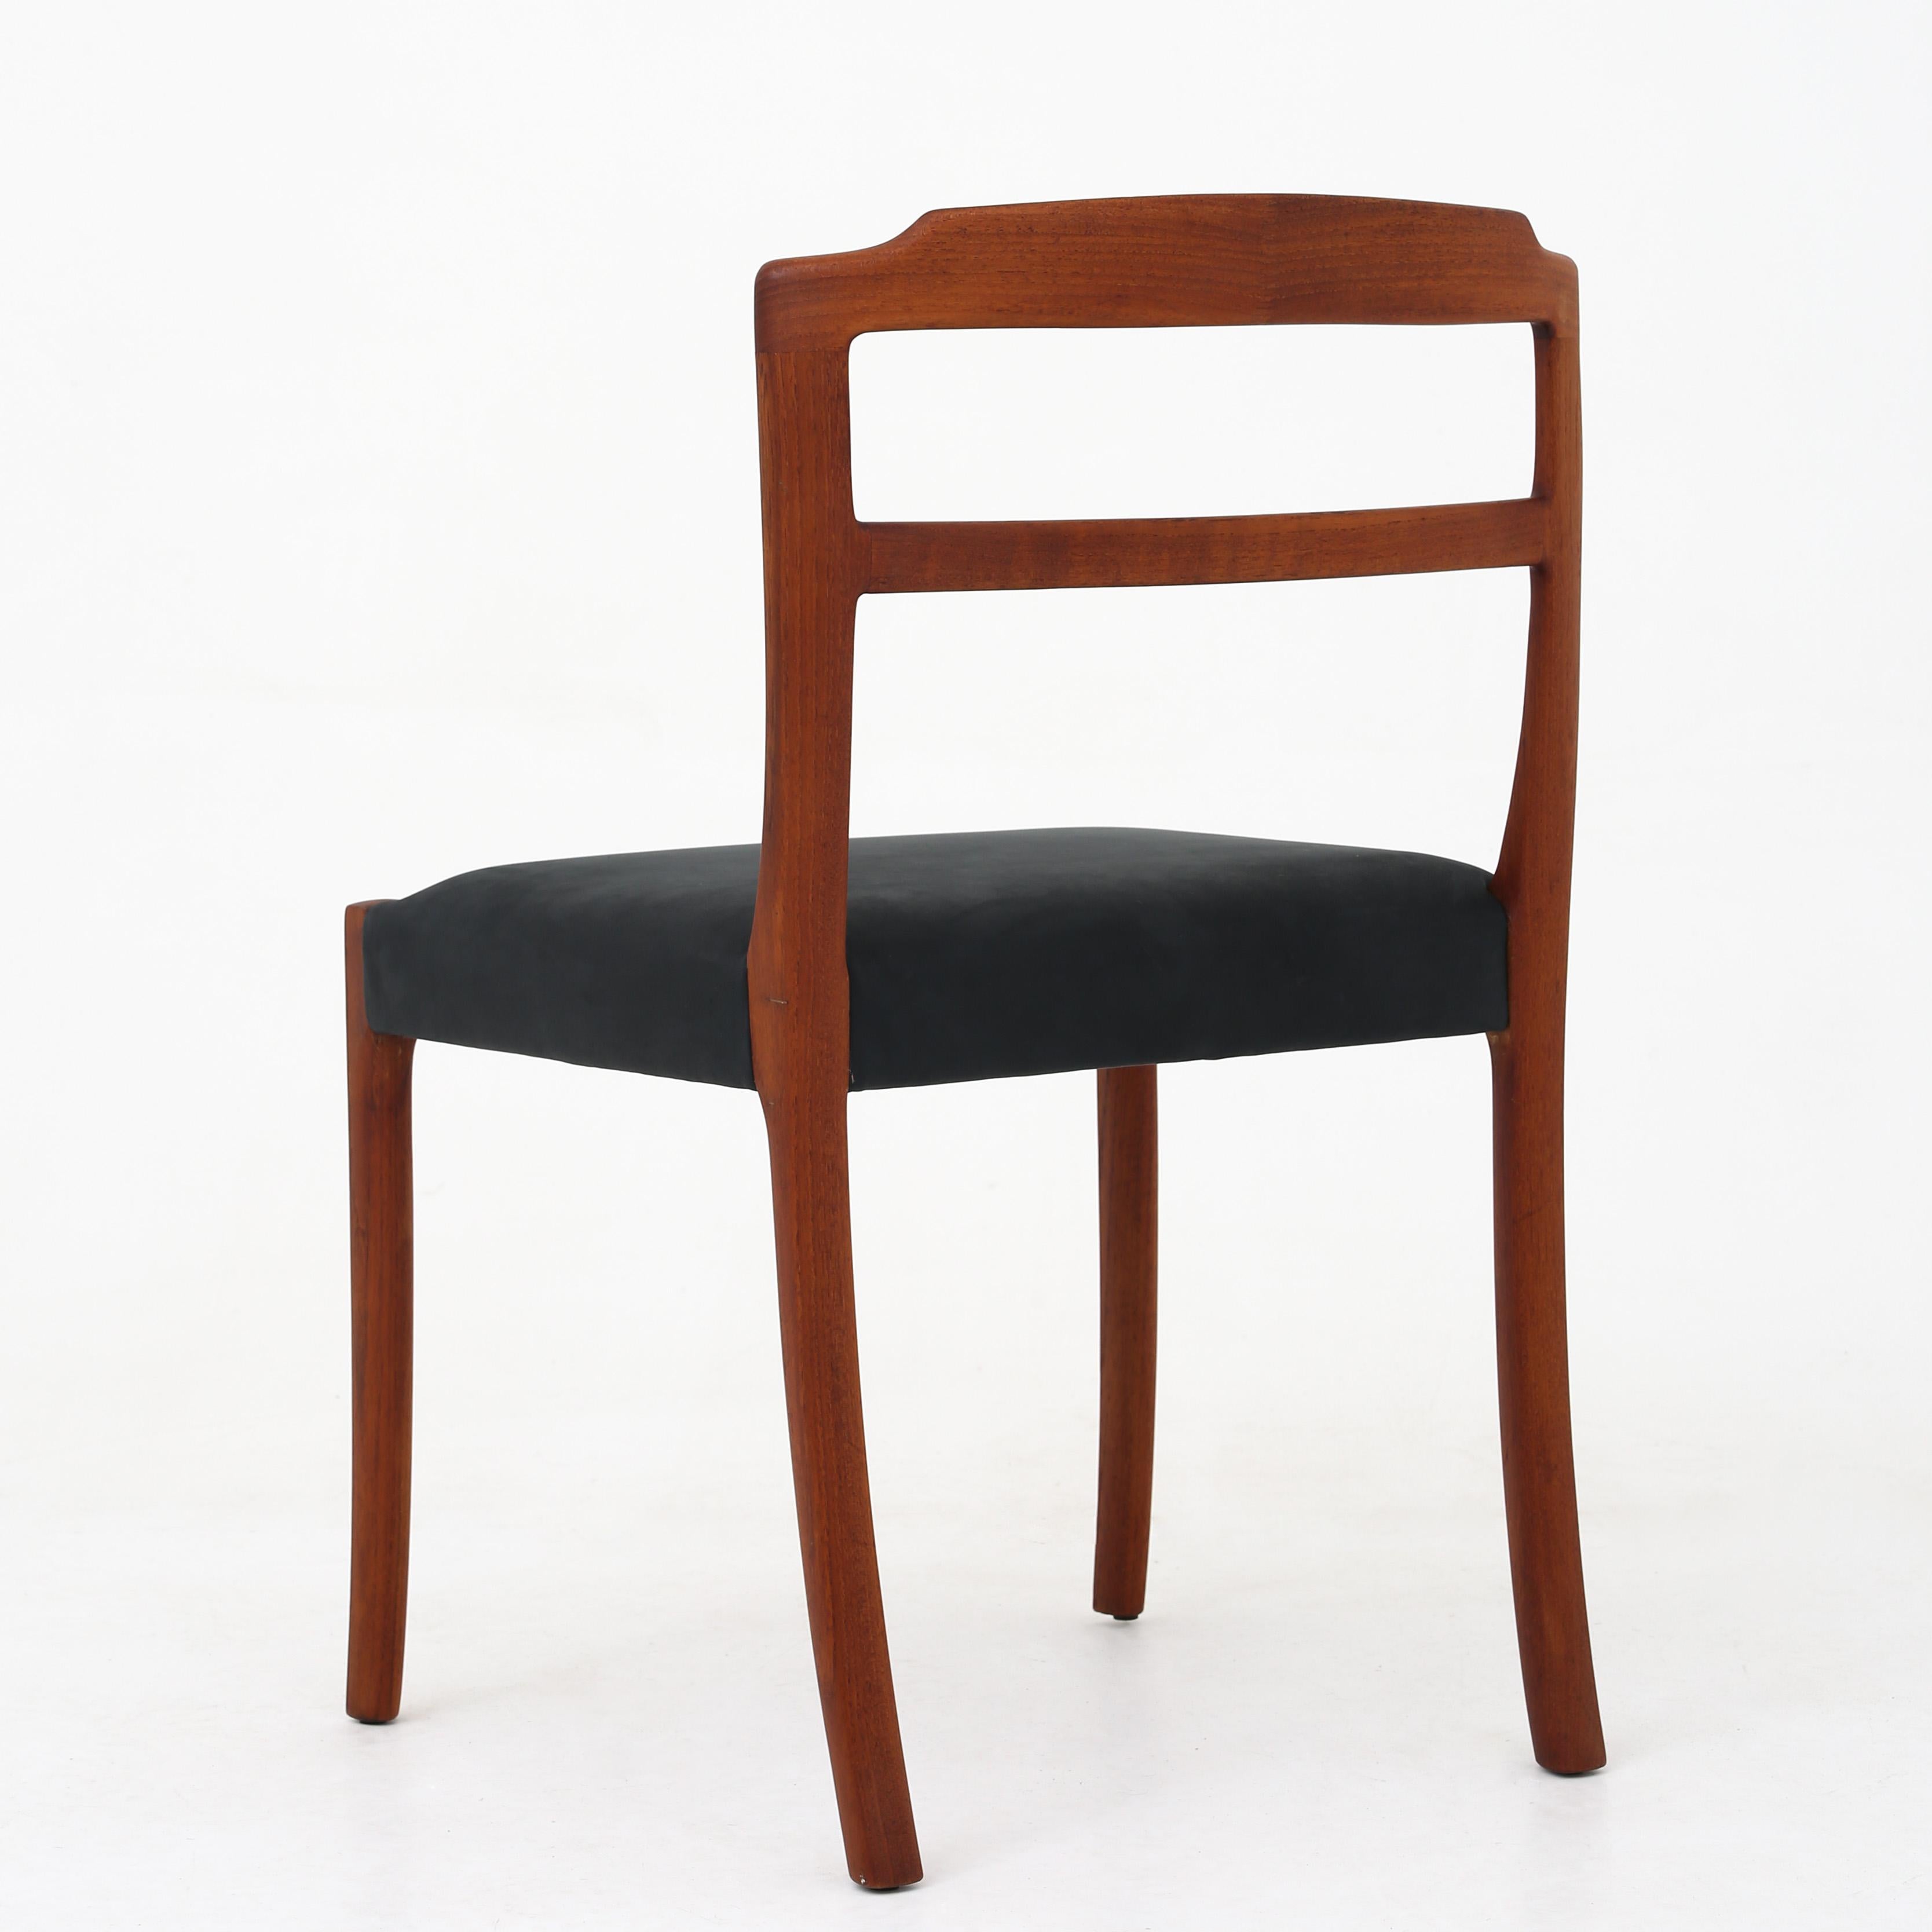 Ole Wanscher dining chairs in teak with reupholstered seat in 'Dunes' aniline leather (colour: Anthrazite, black).